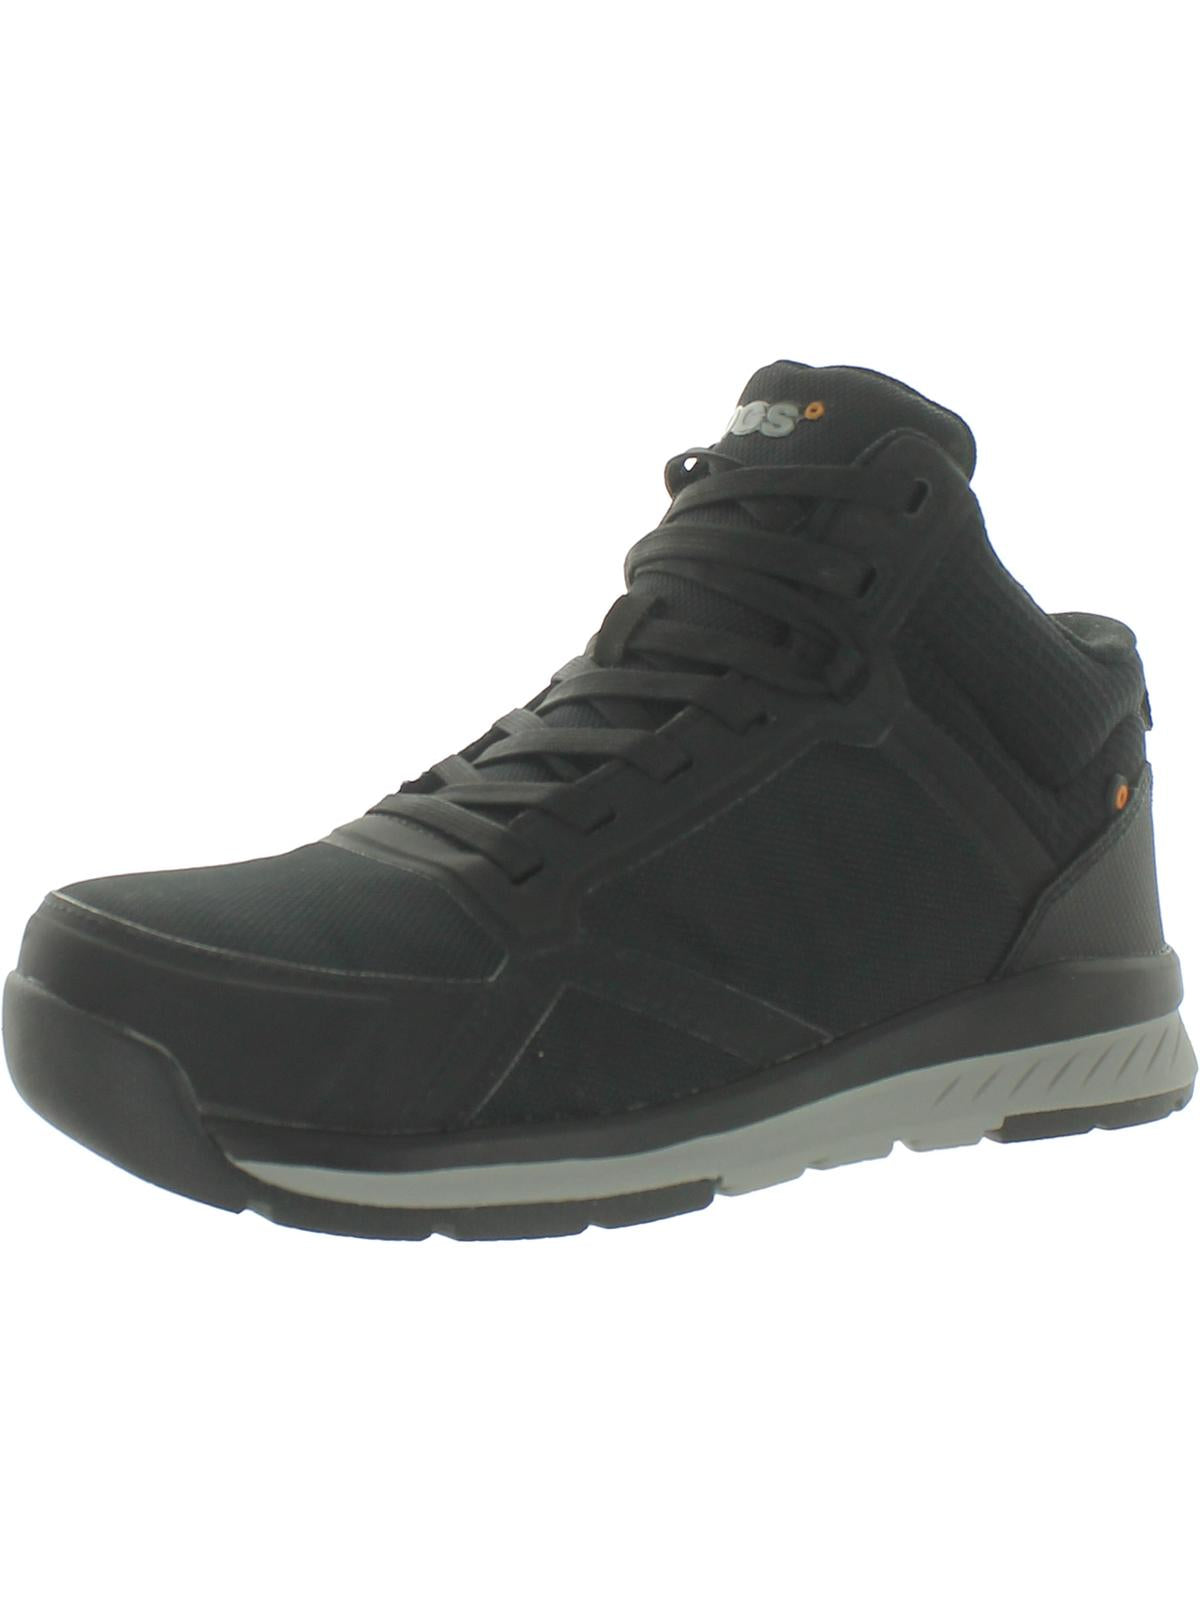 Bogs Sandstone Mid Womens Composite Toe Comfort Work & Safety Boots In Black